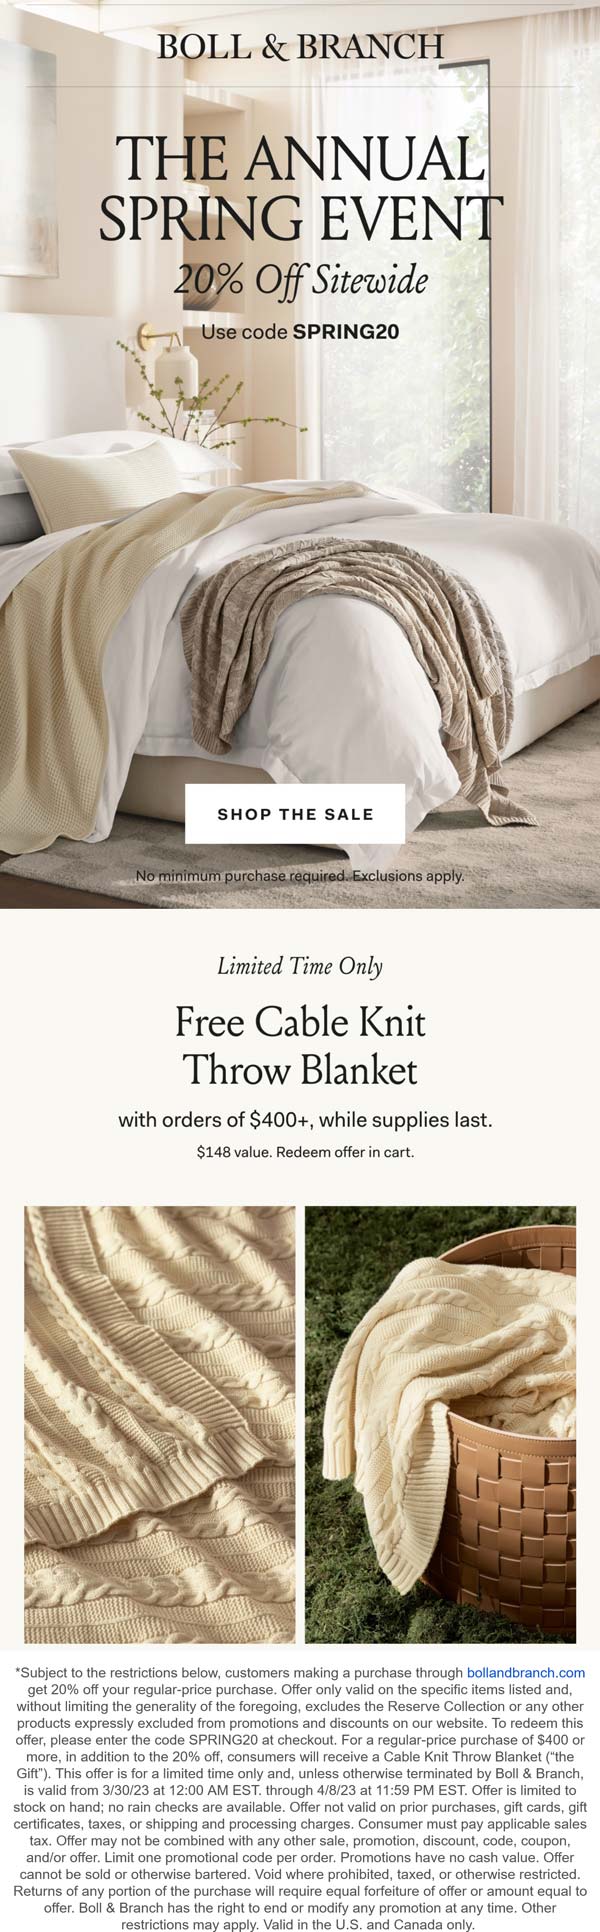 Boll & Branch stores Coupon  20% off + free $148 throw blanket on $400 at Boll & Branch via promo code SPRING20 #bollbranch 